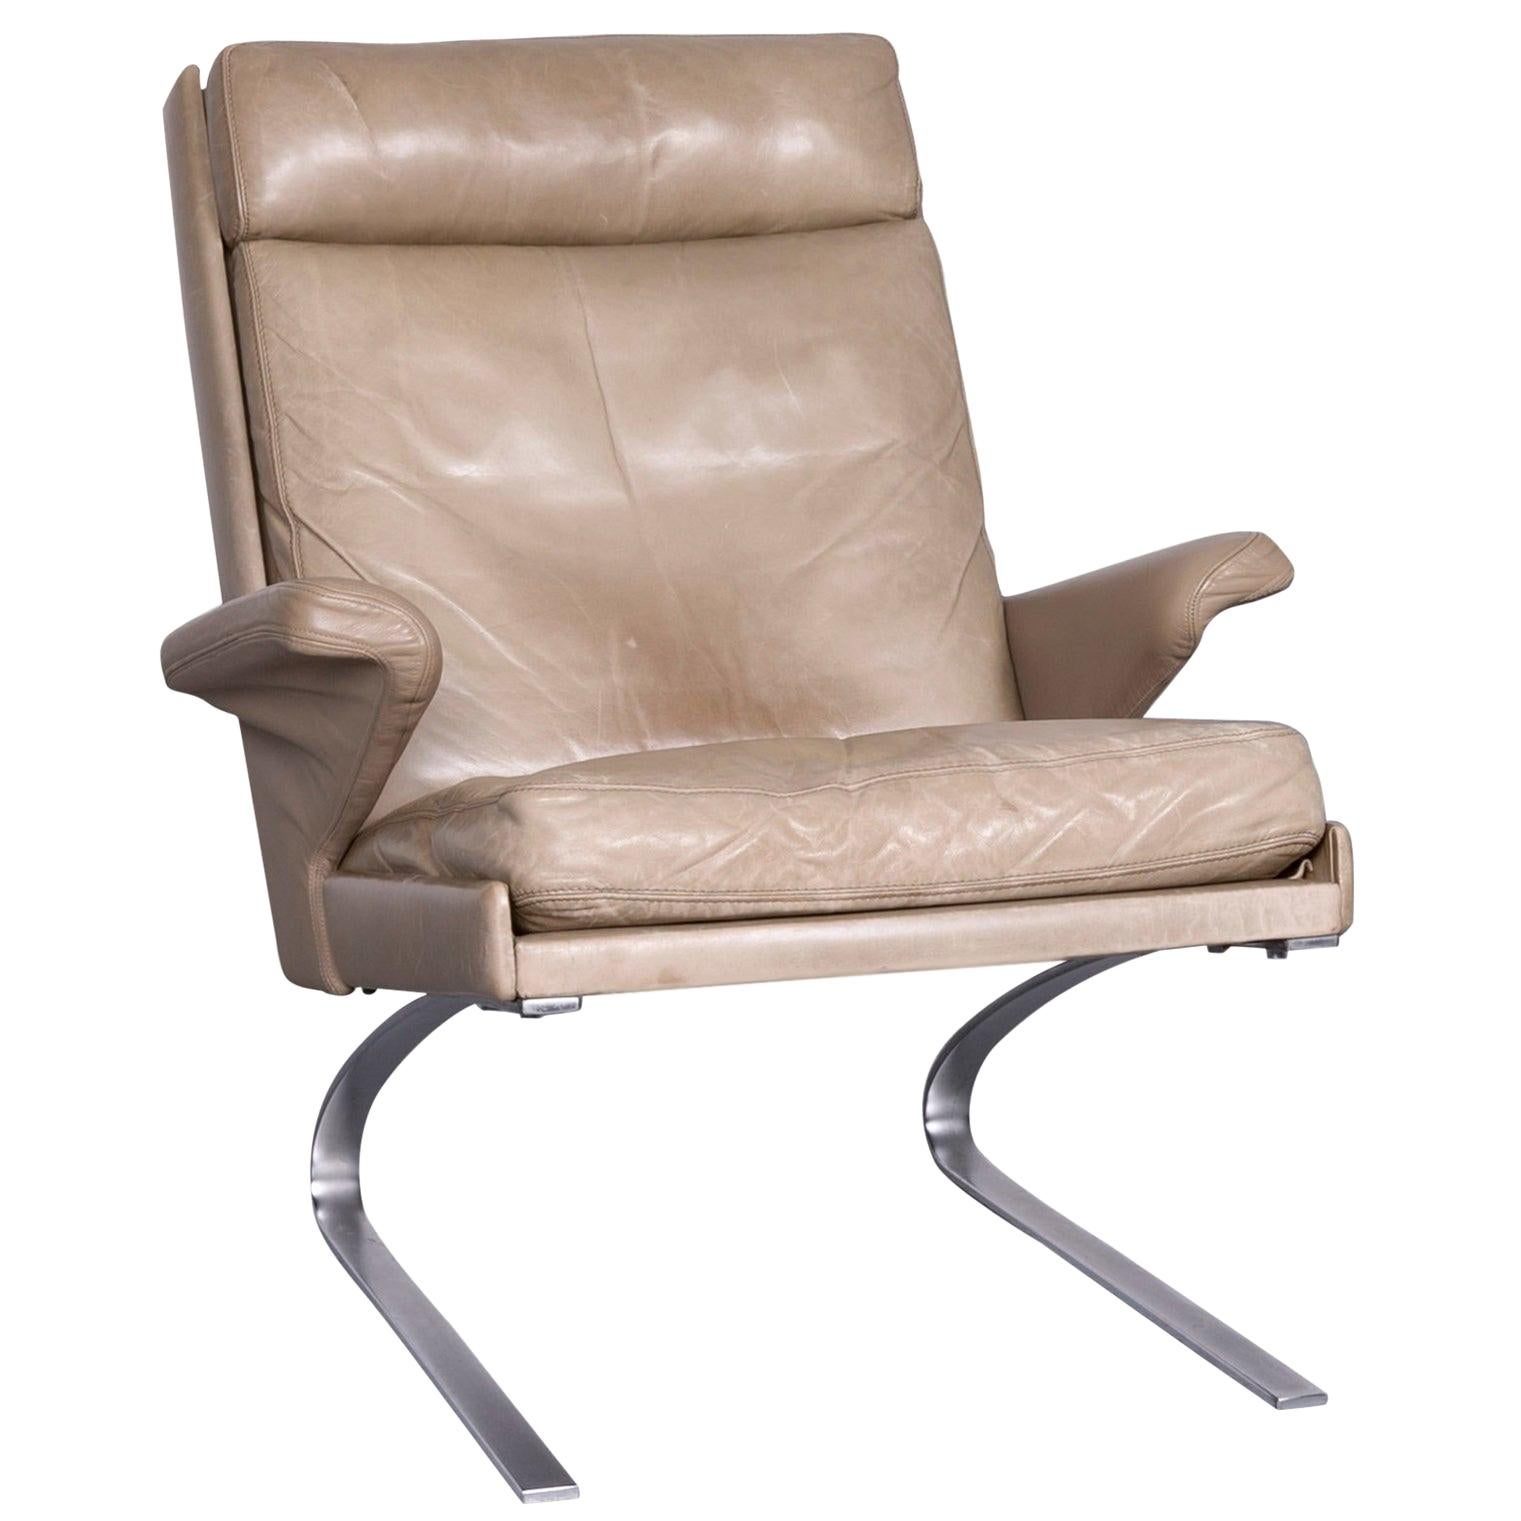 COR Swing Designer Leather Armchair Crème One-Seat Chair For Sale